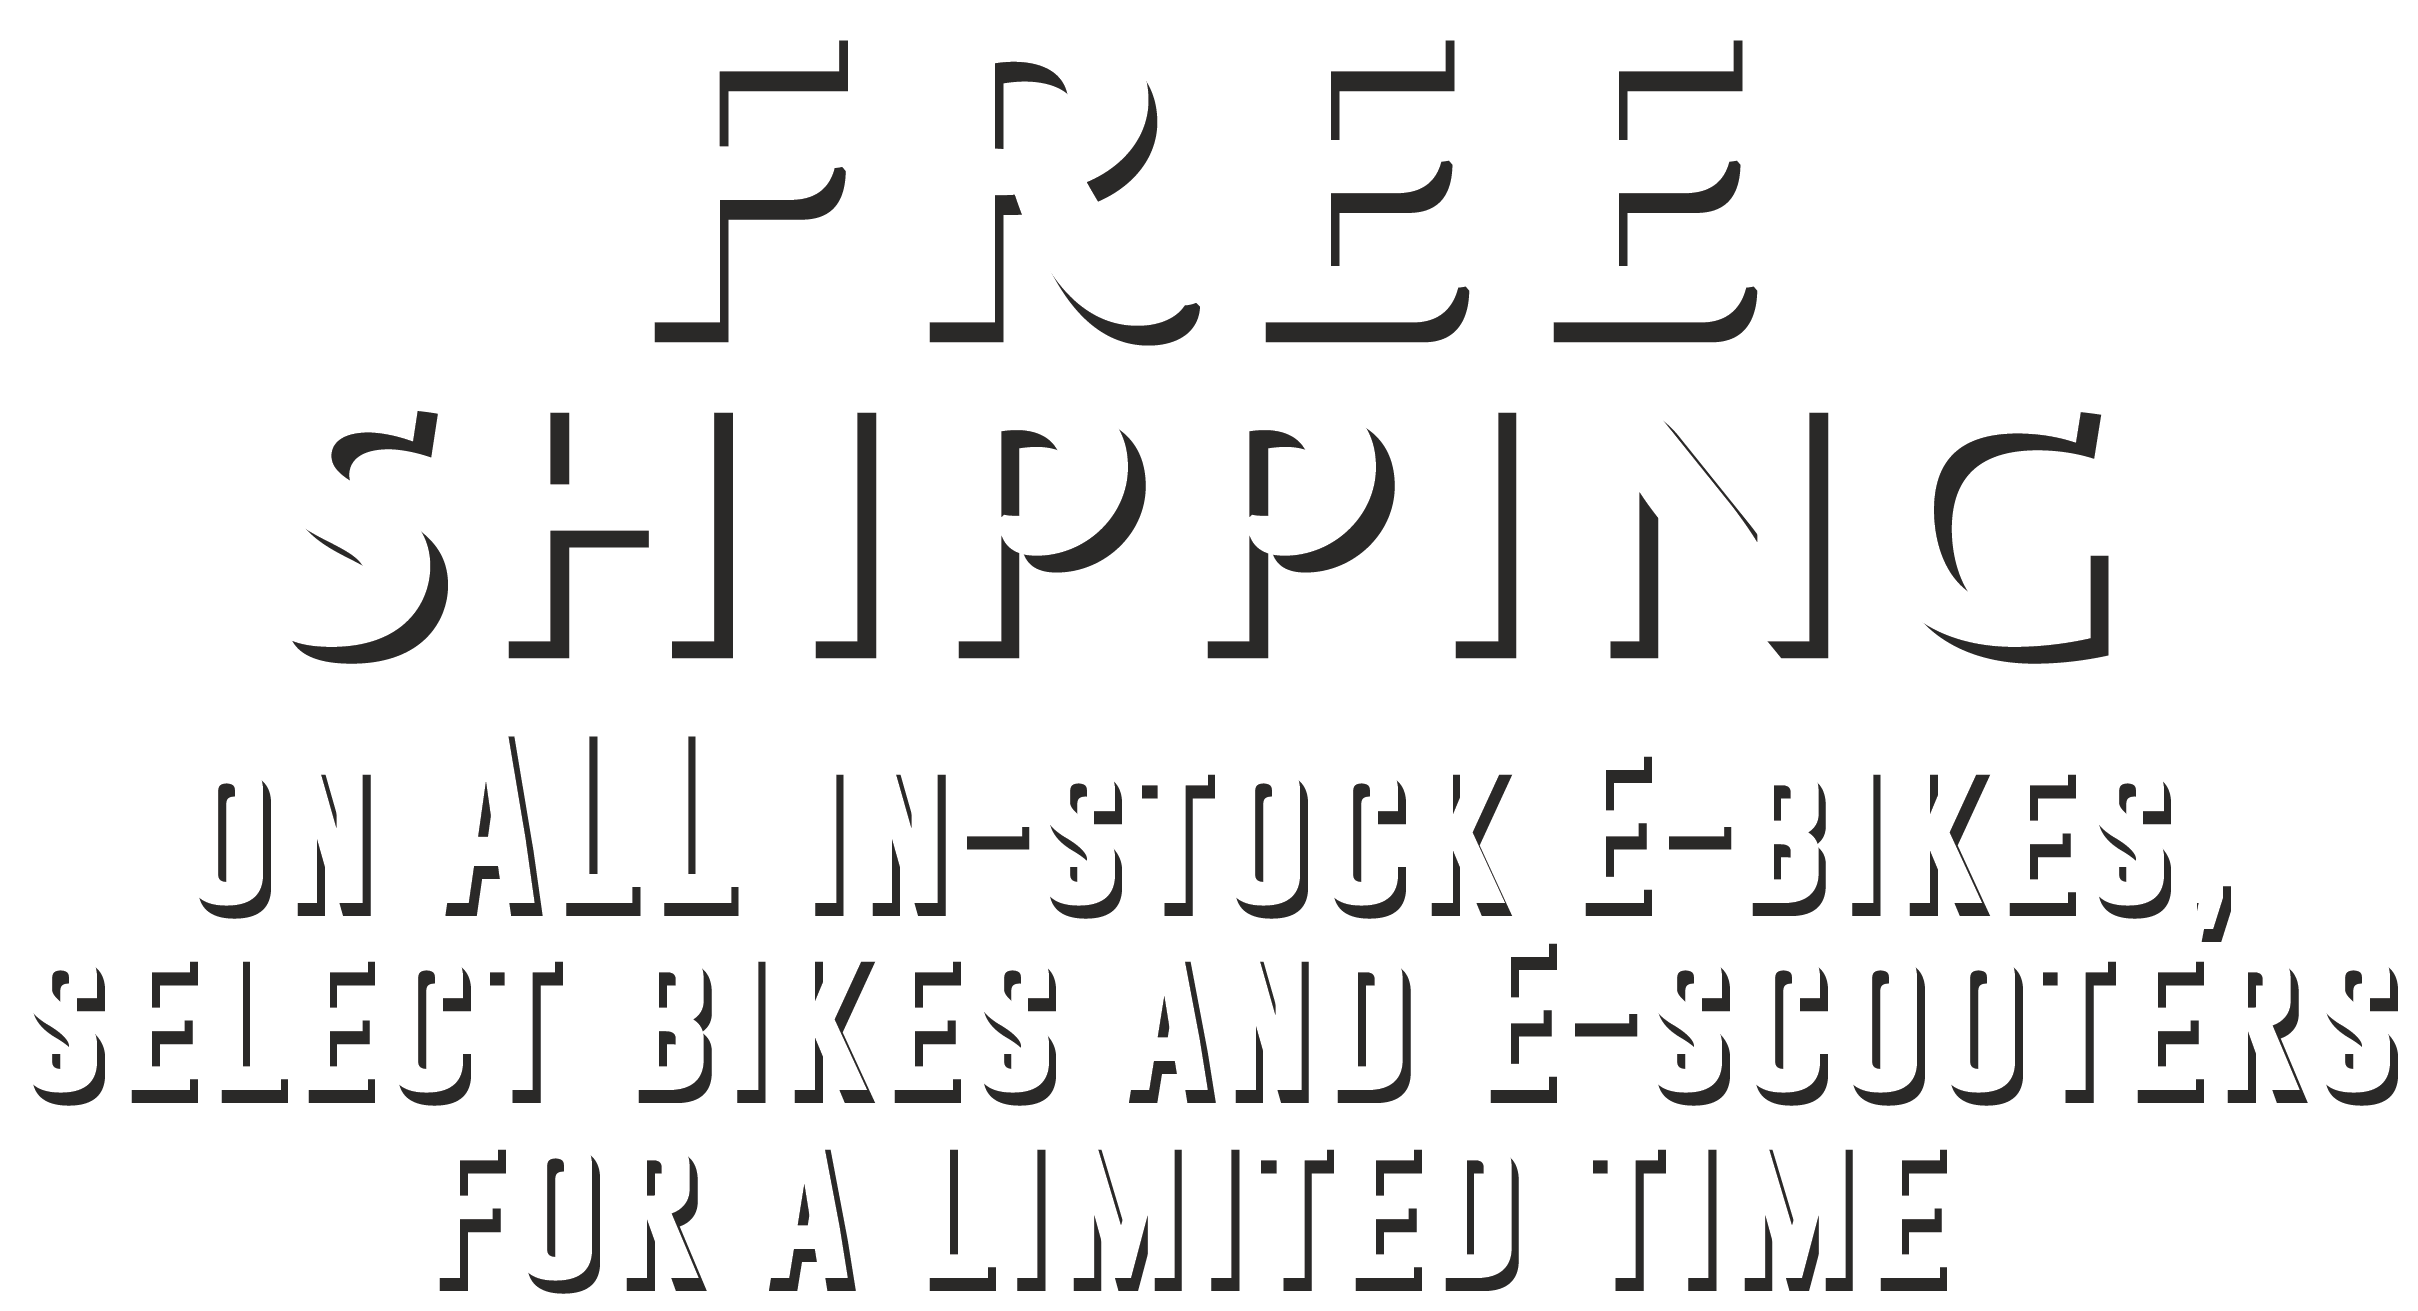 FREE SHIPPING on ALL in-stock E-bikes, Select Bikes and E-scooters for a limited time.